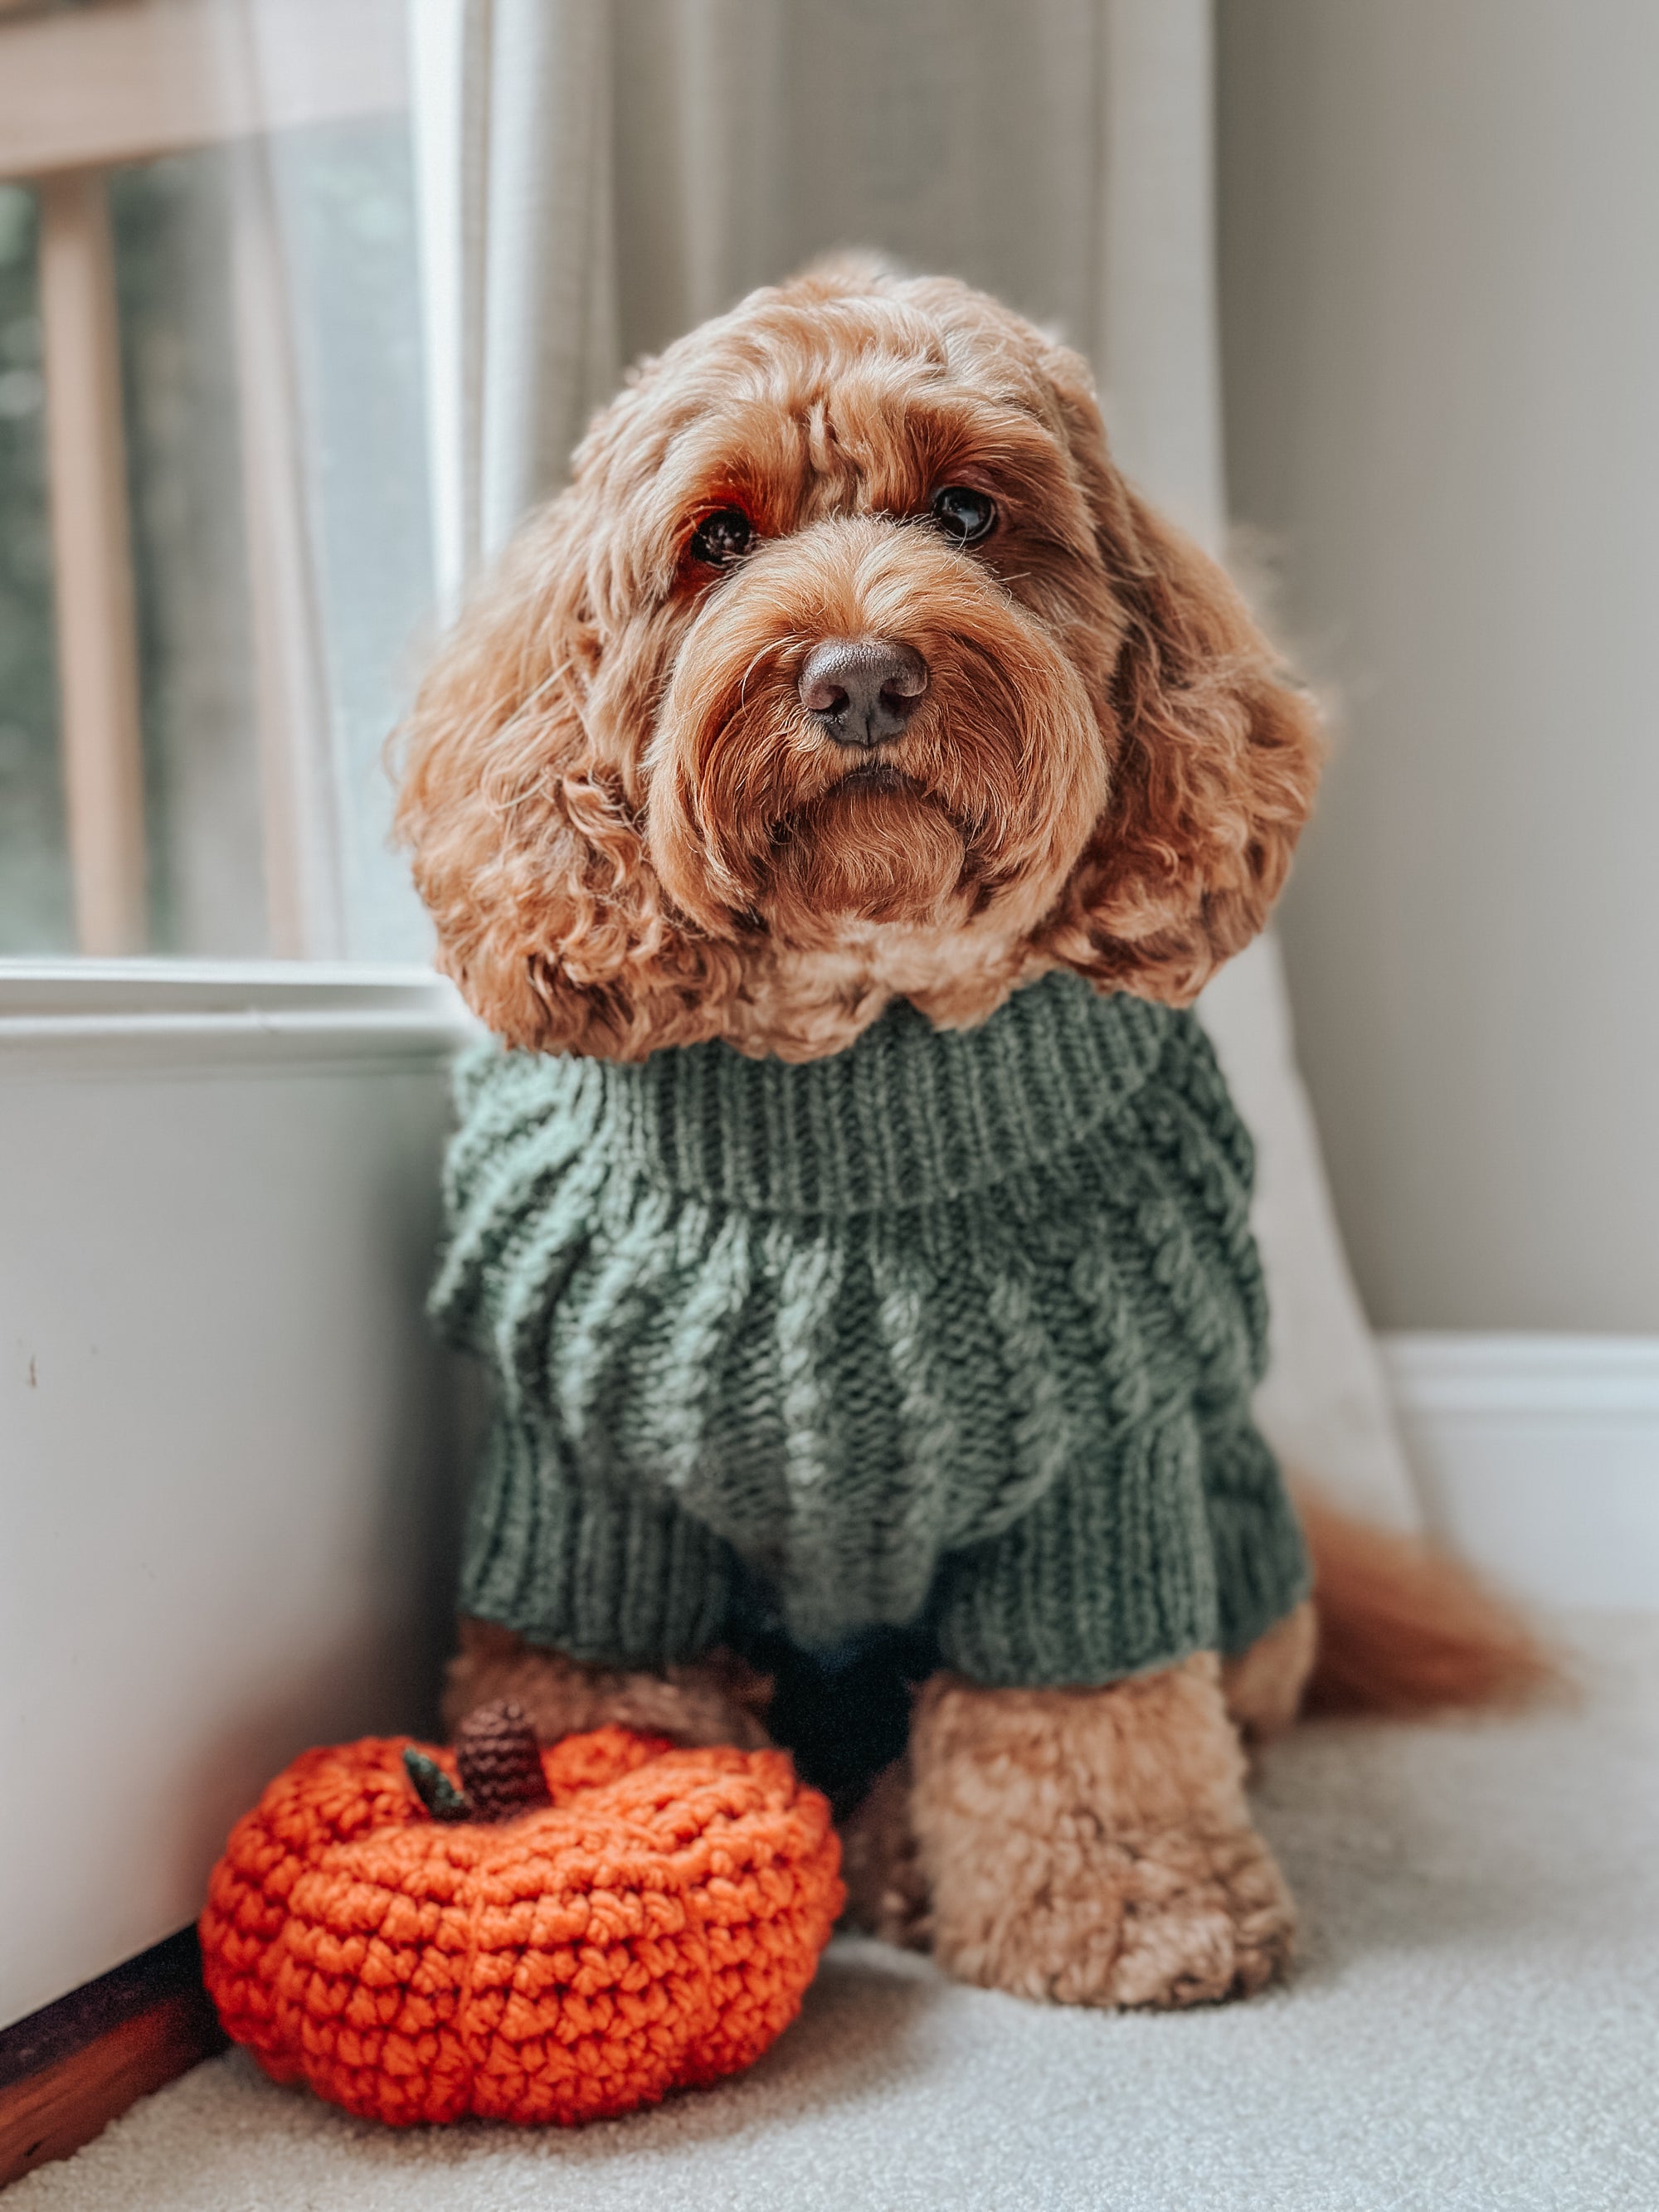 INFLUENCER_CONTENT | @INDY.THECOCKAPOO | SIZE XL